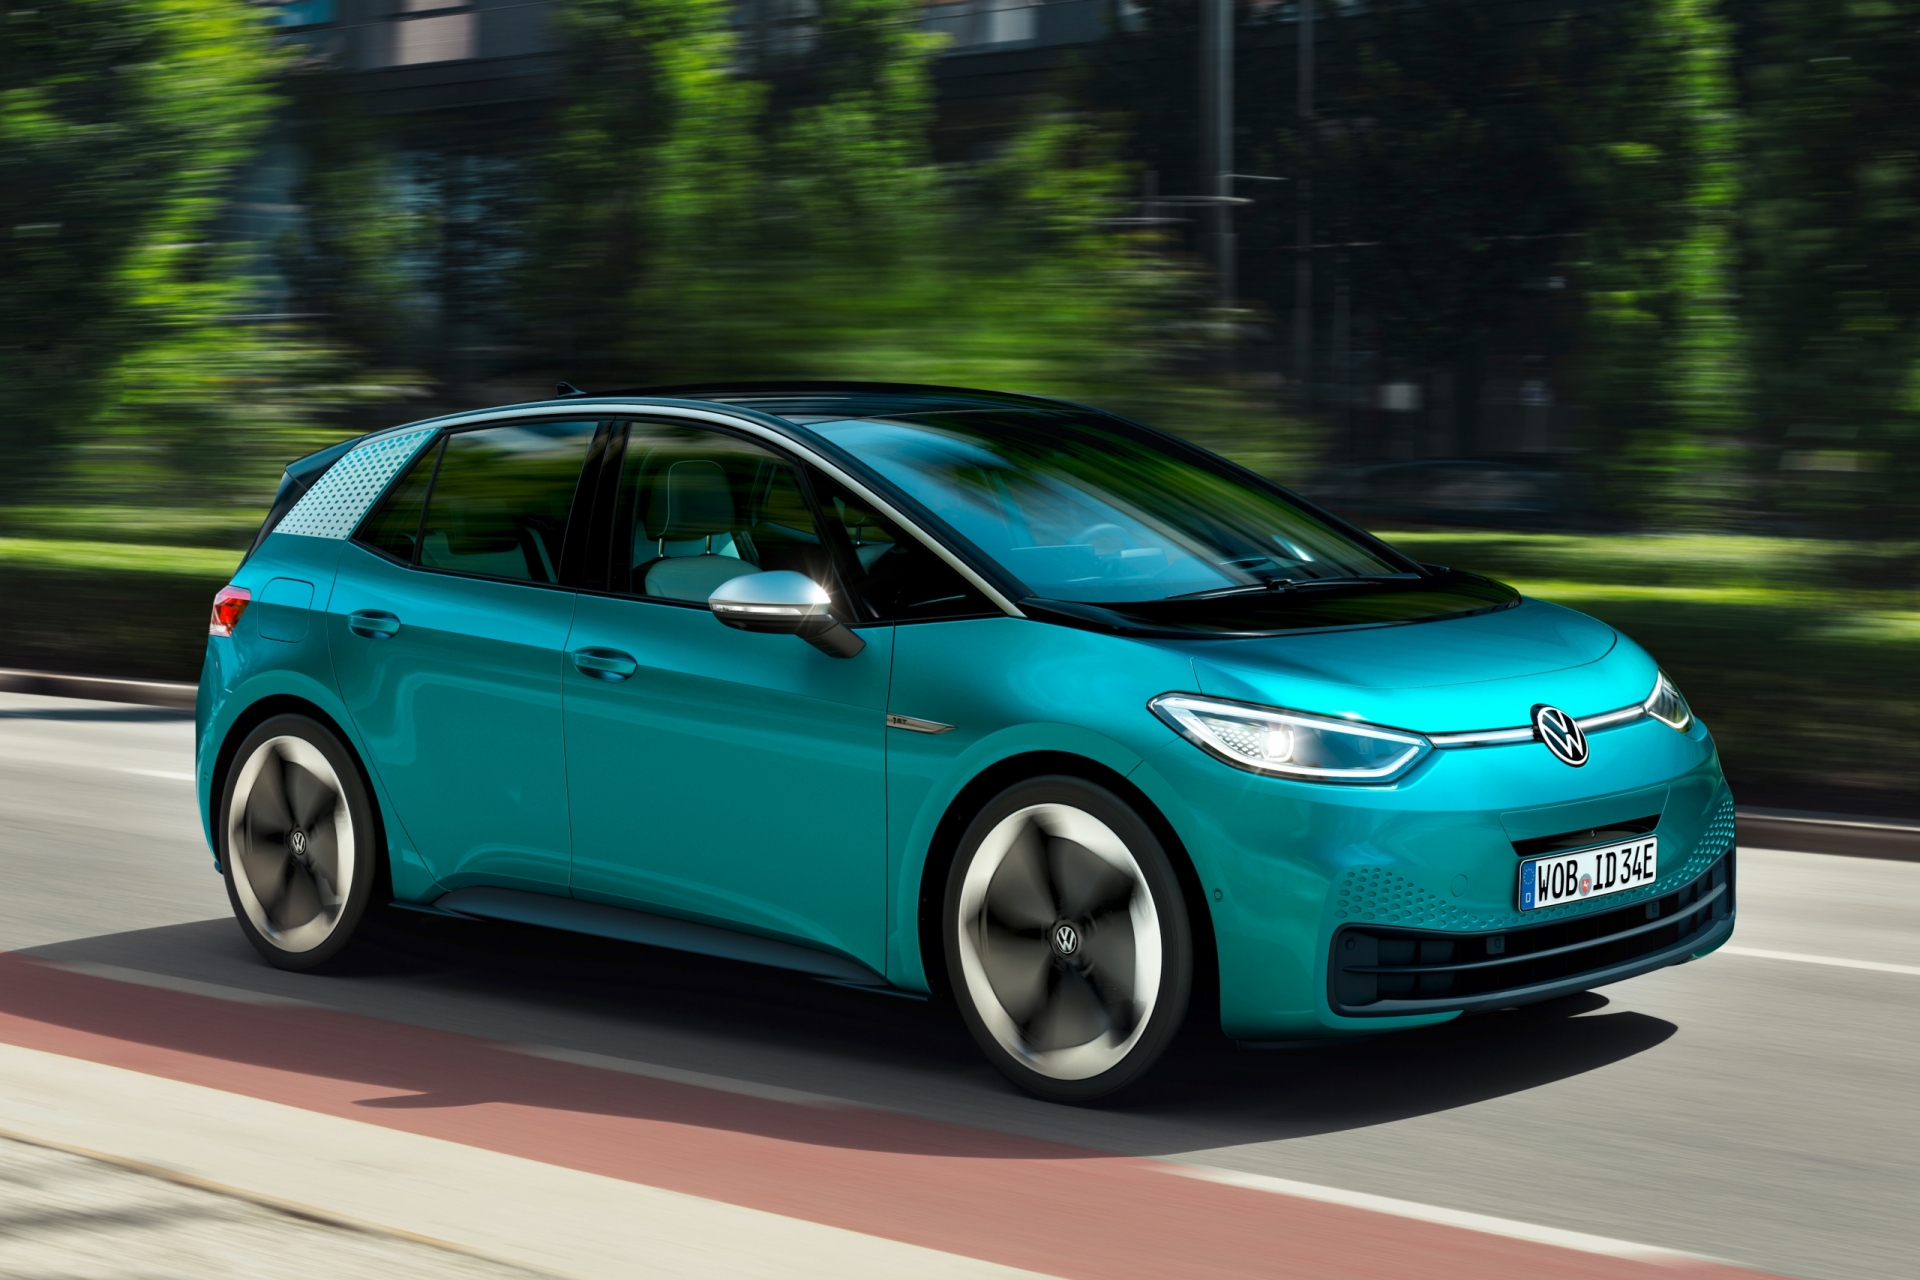 Volkswagen is preparing a new budget range of electric cars with prices starting from 19,000 euros